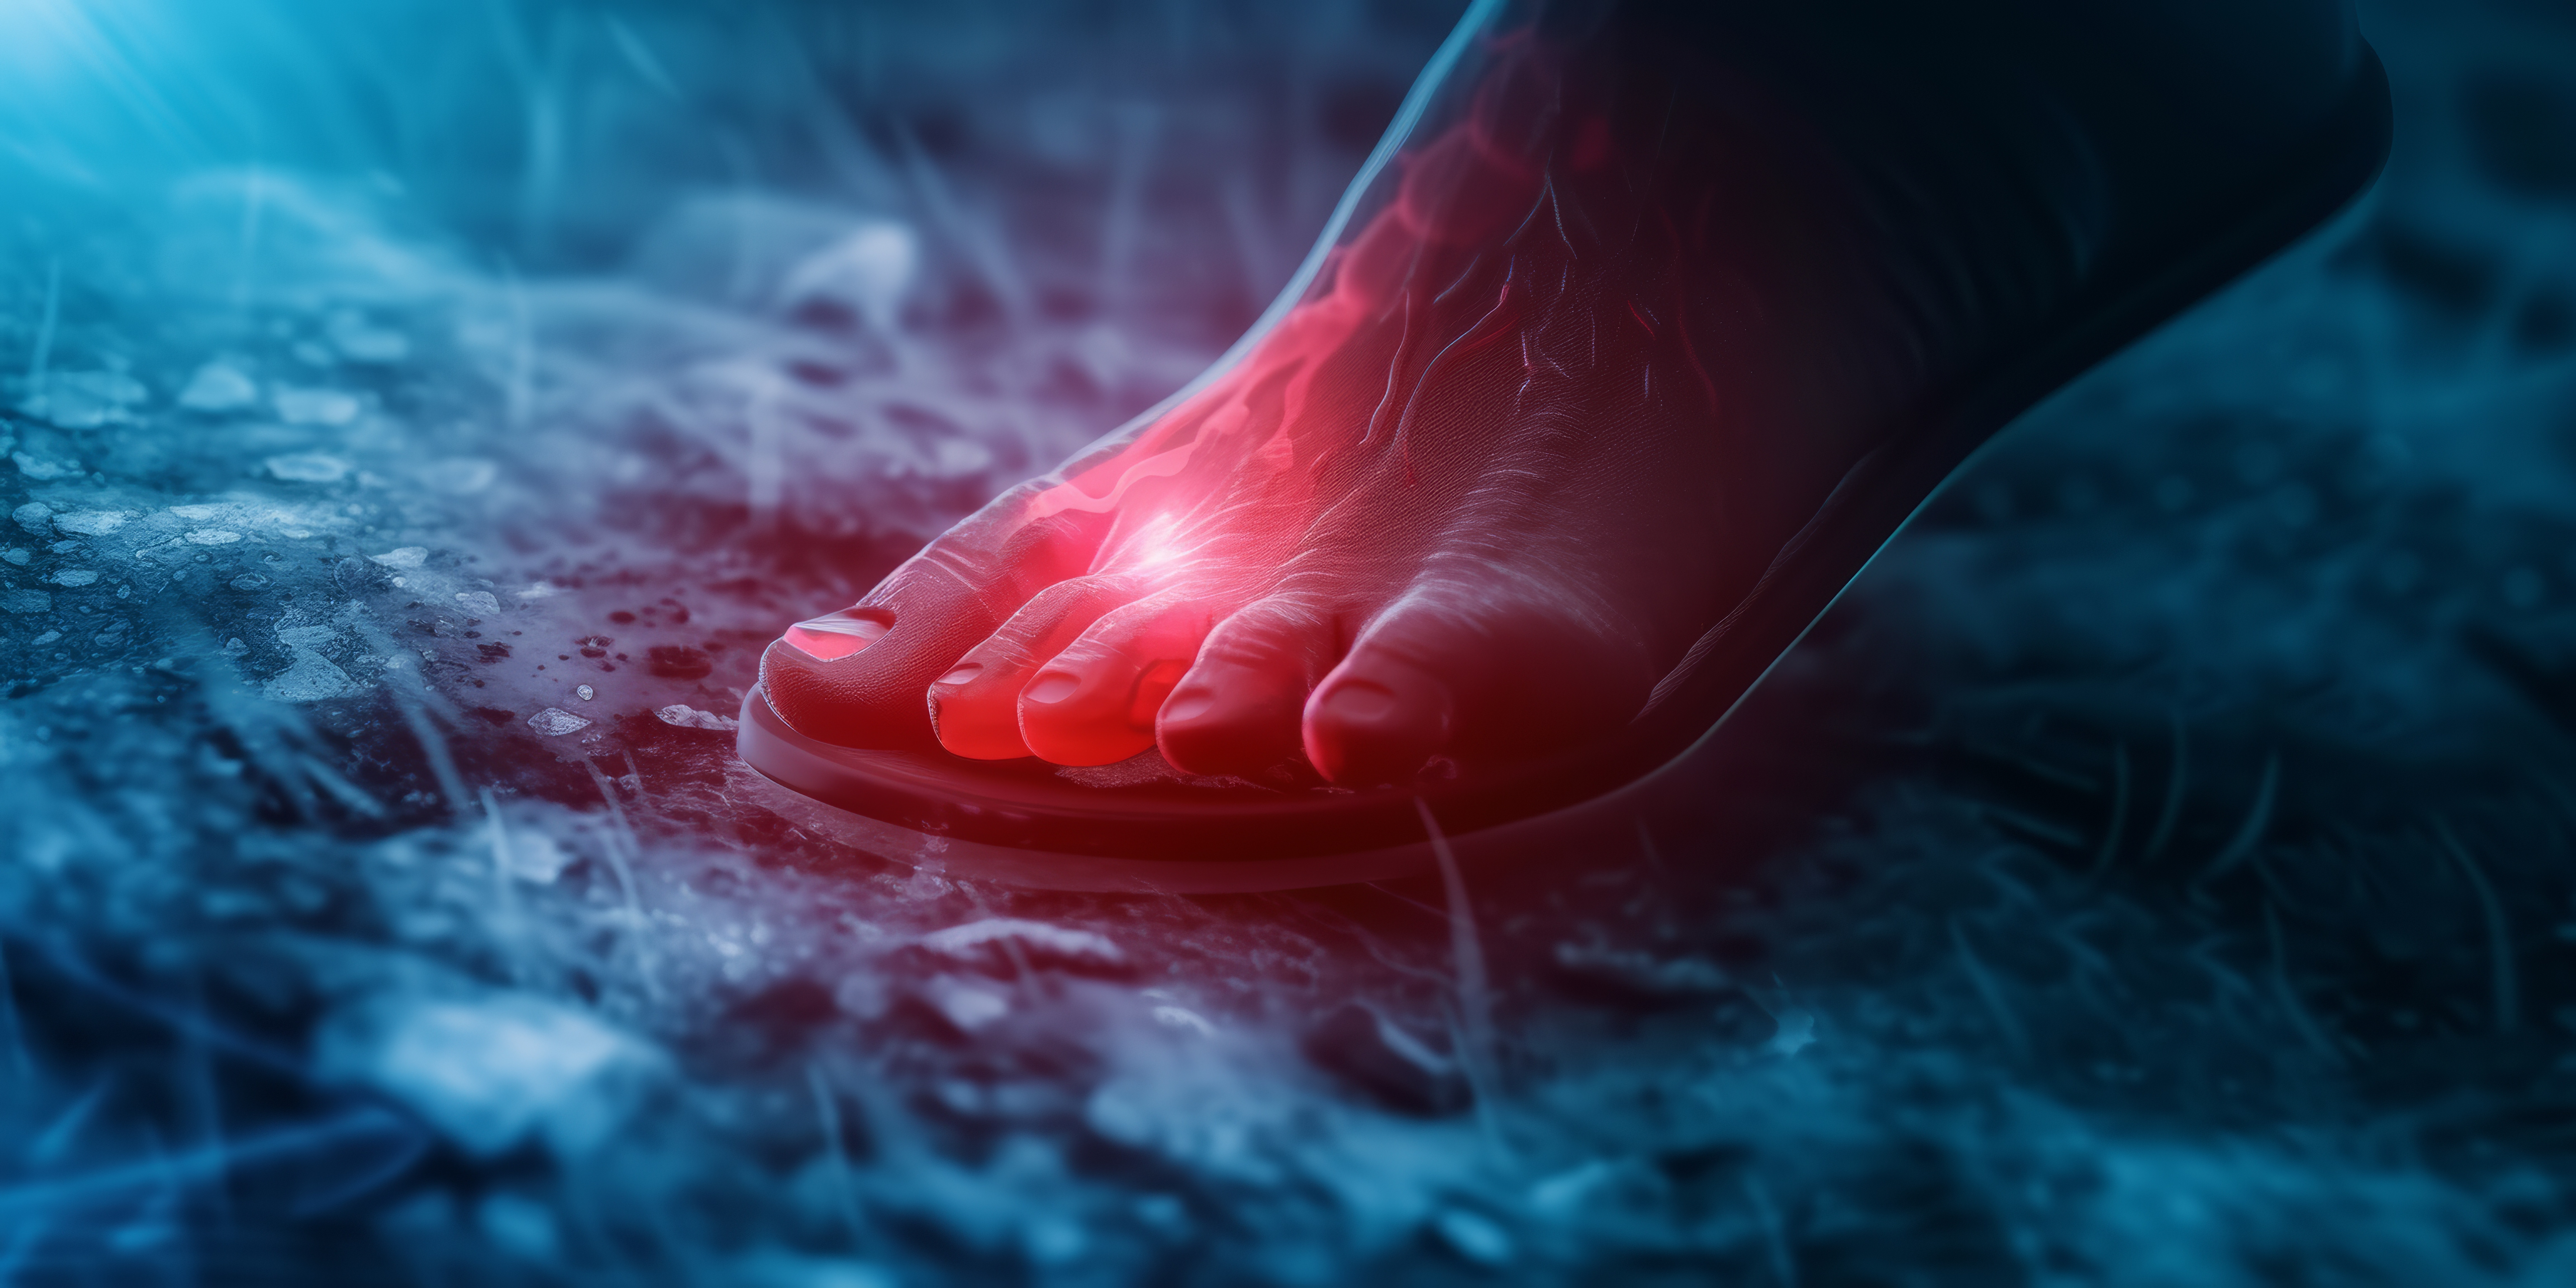 To avoid amputation, diabetics must be vigilant about foot wounds — and seek treatment early and often